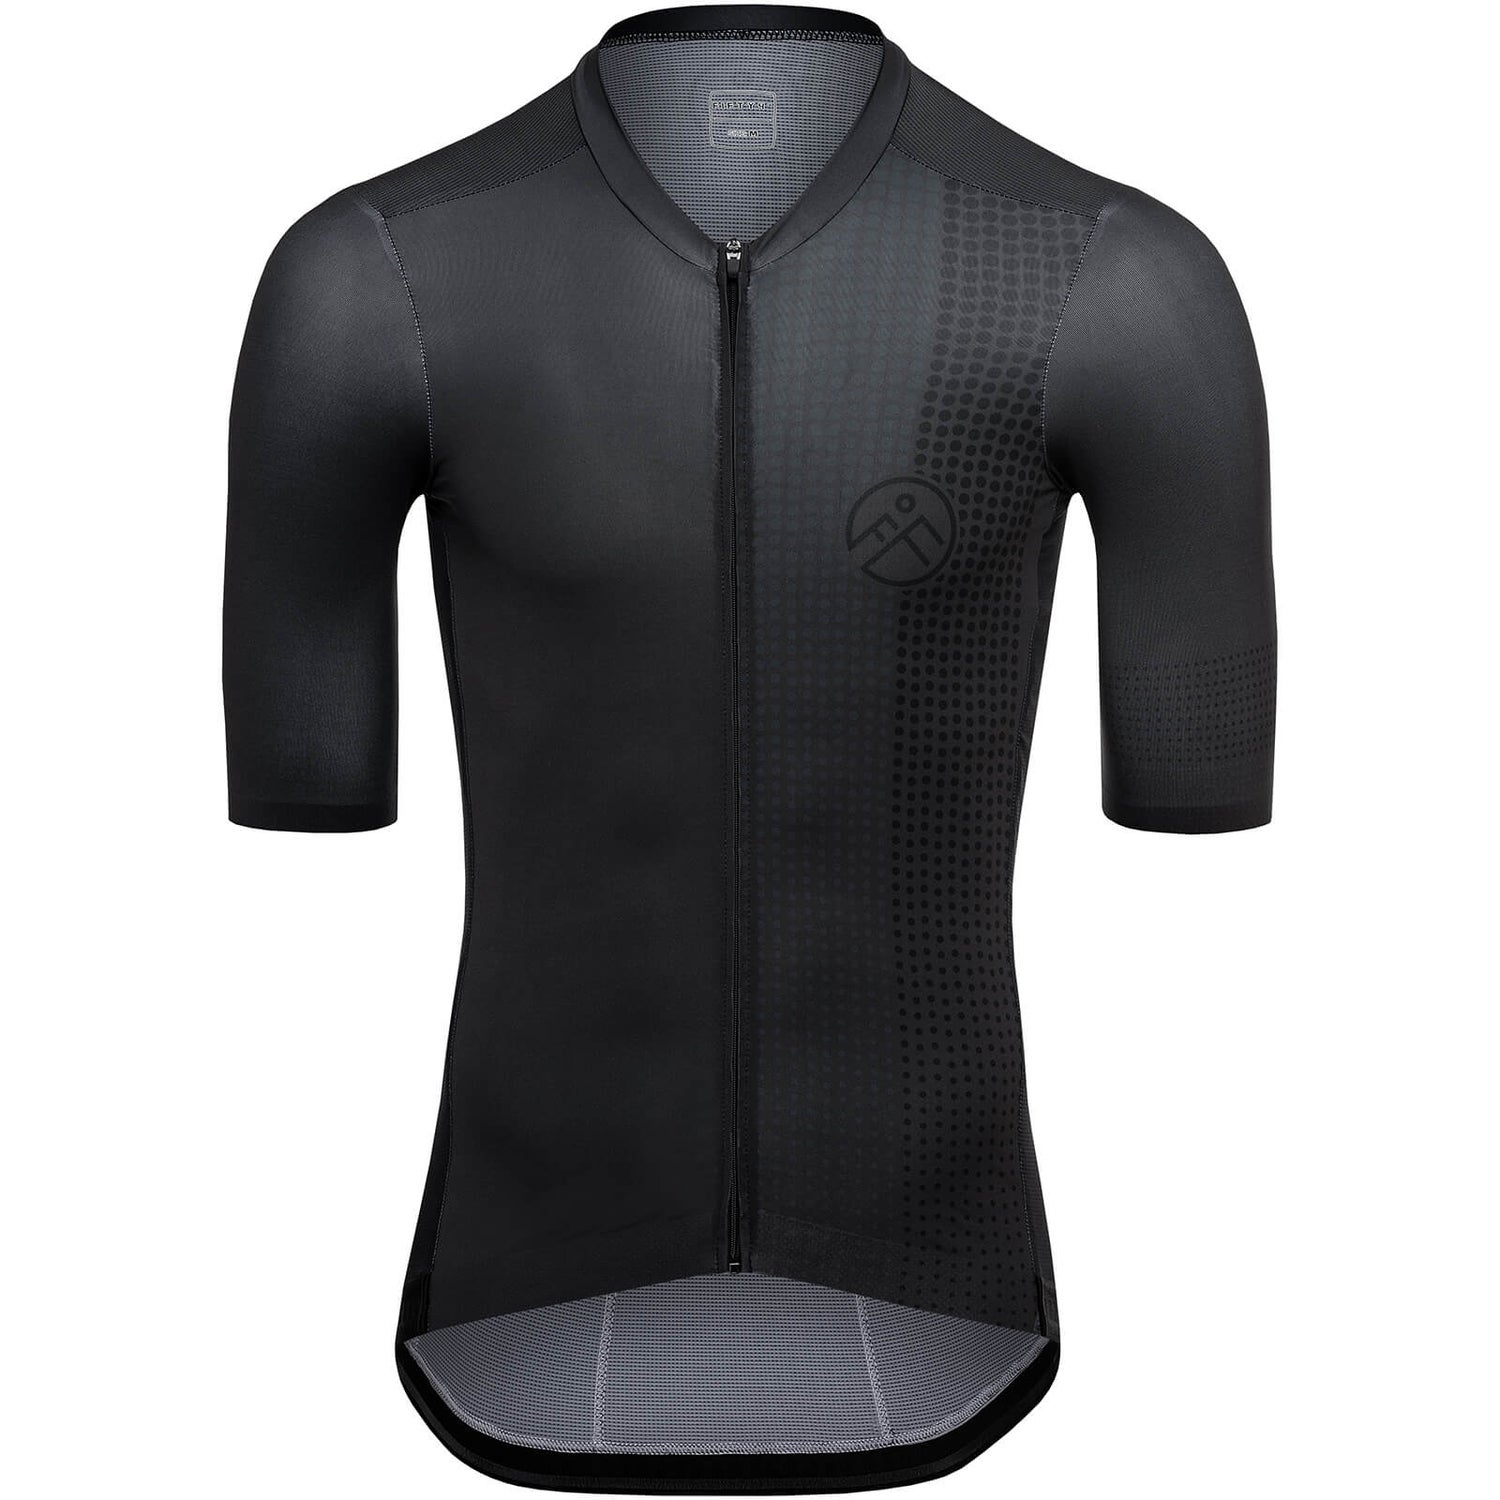 Fifty Four Degree Exo Jersey | ProBikeKit.com